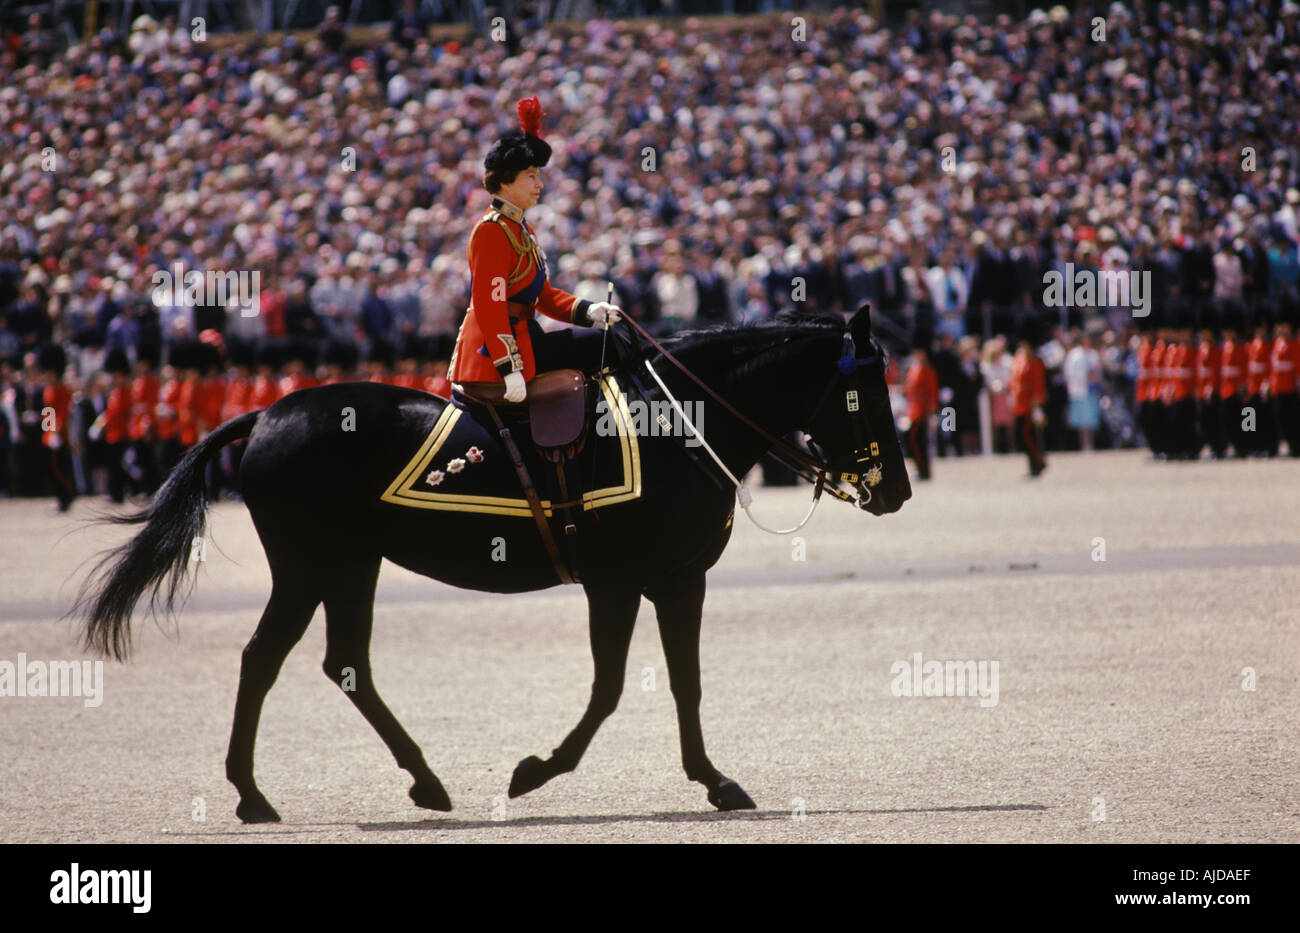 Queen Elizabeth II riding side saddle on horse named Burmese. Trooping the Colour ceremony Horse Guards Parade London June1985 Uk England 1980s Stock Photo